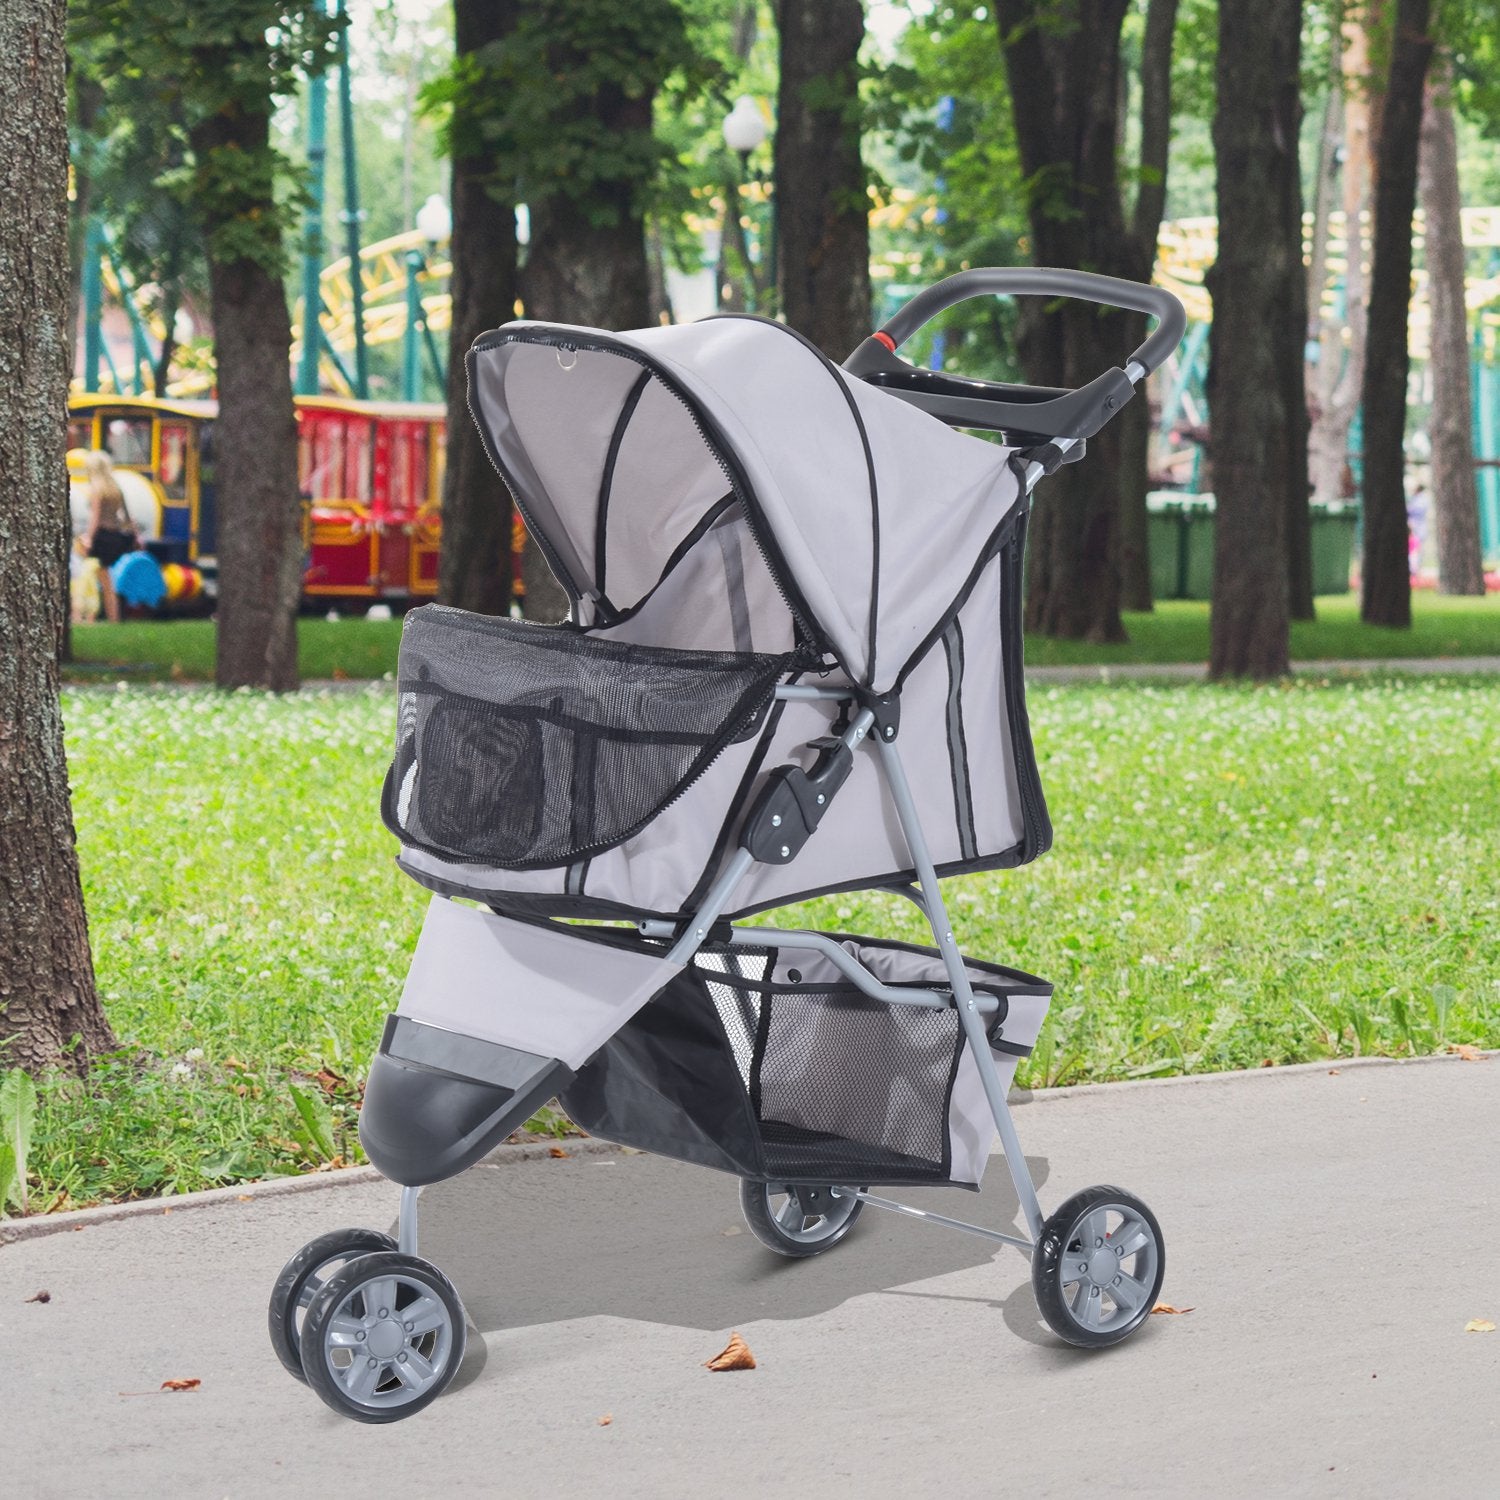 Dogs Oxford Cloth Three Wheel Pram Grey - Suitable for Small Pets